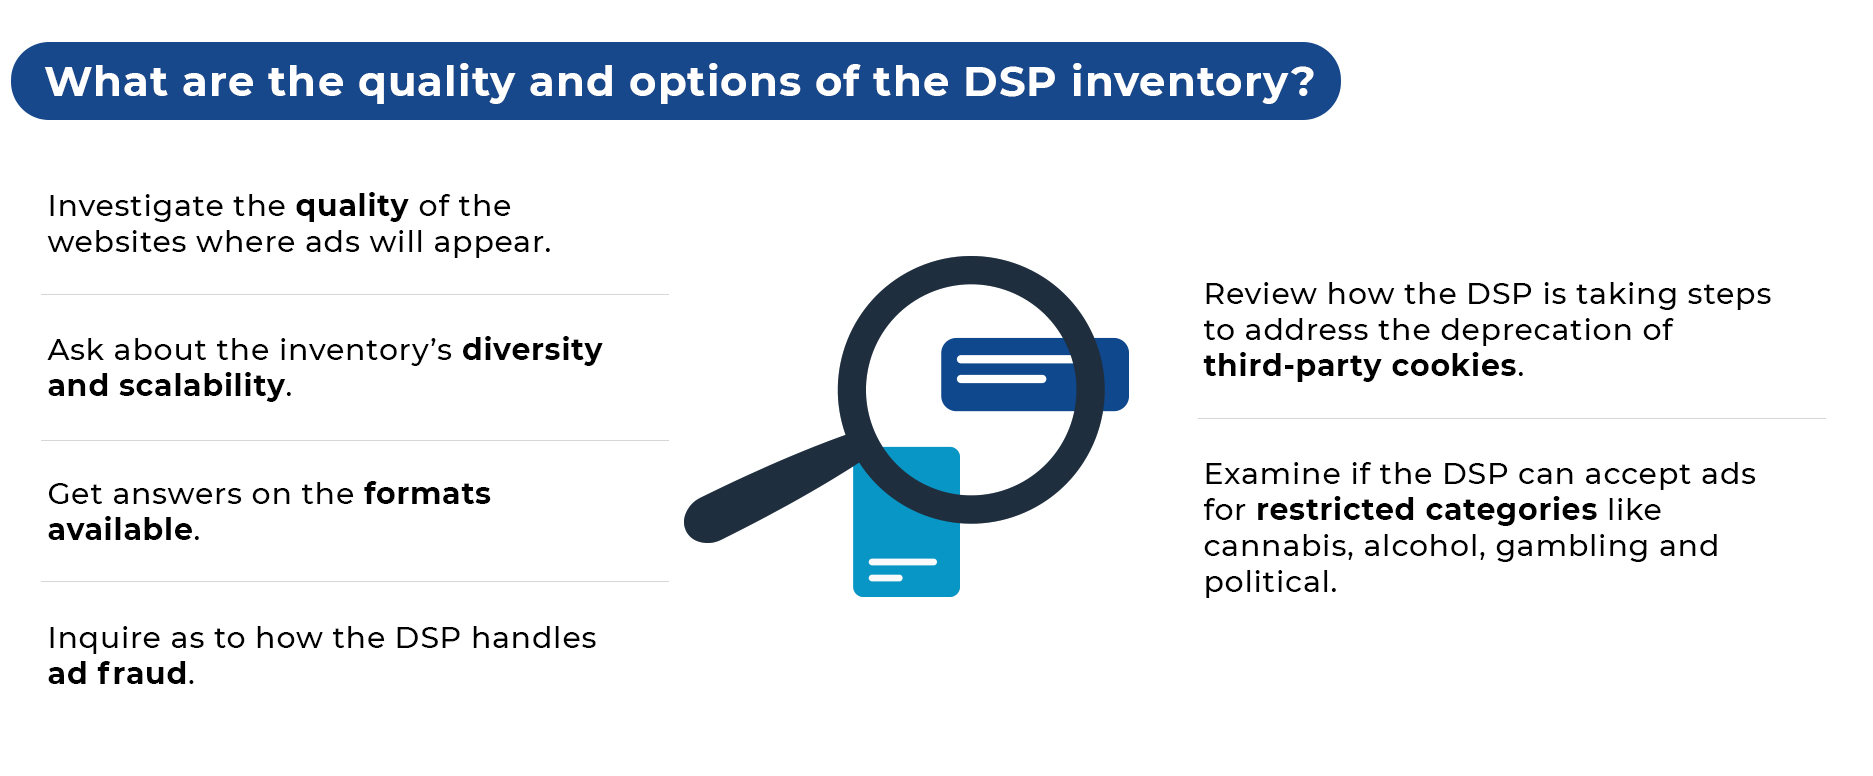 What are the quality and options of the DSP inventory? 